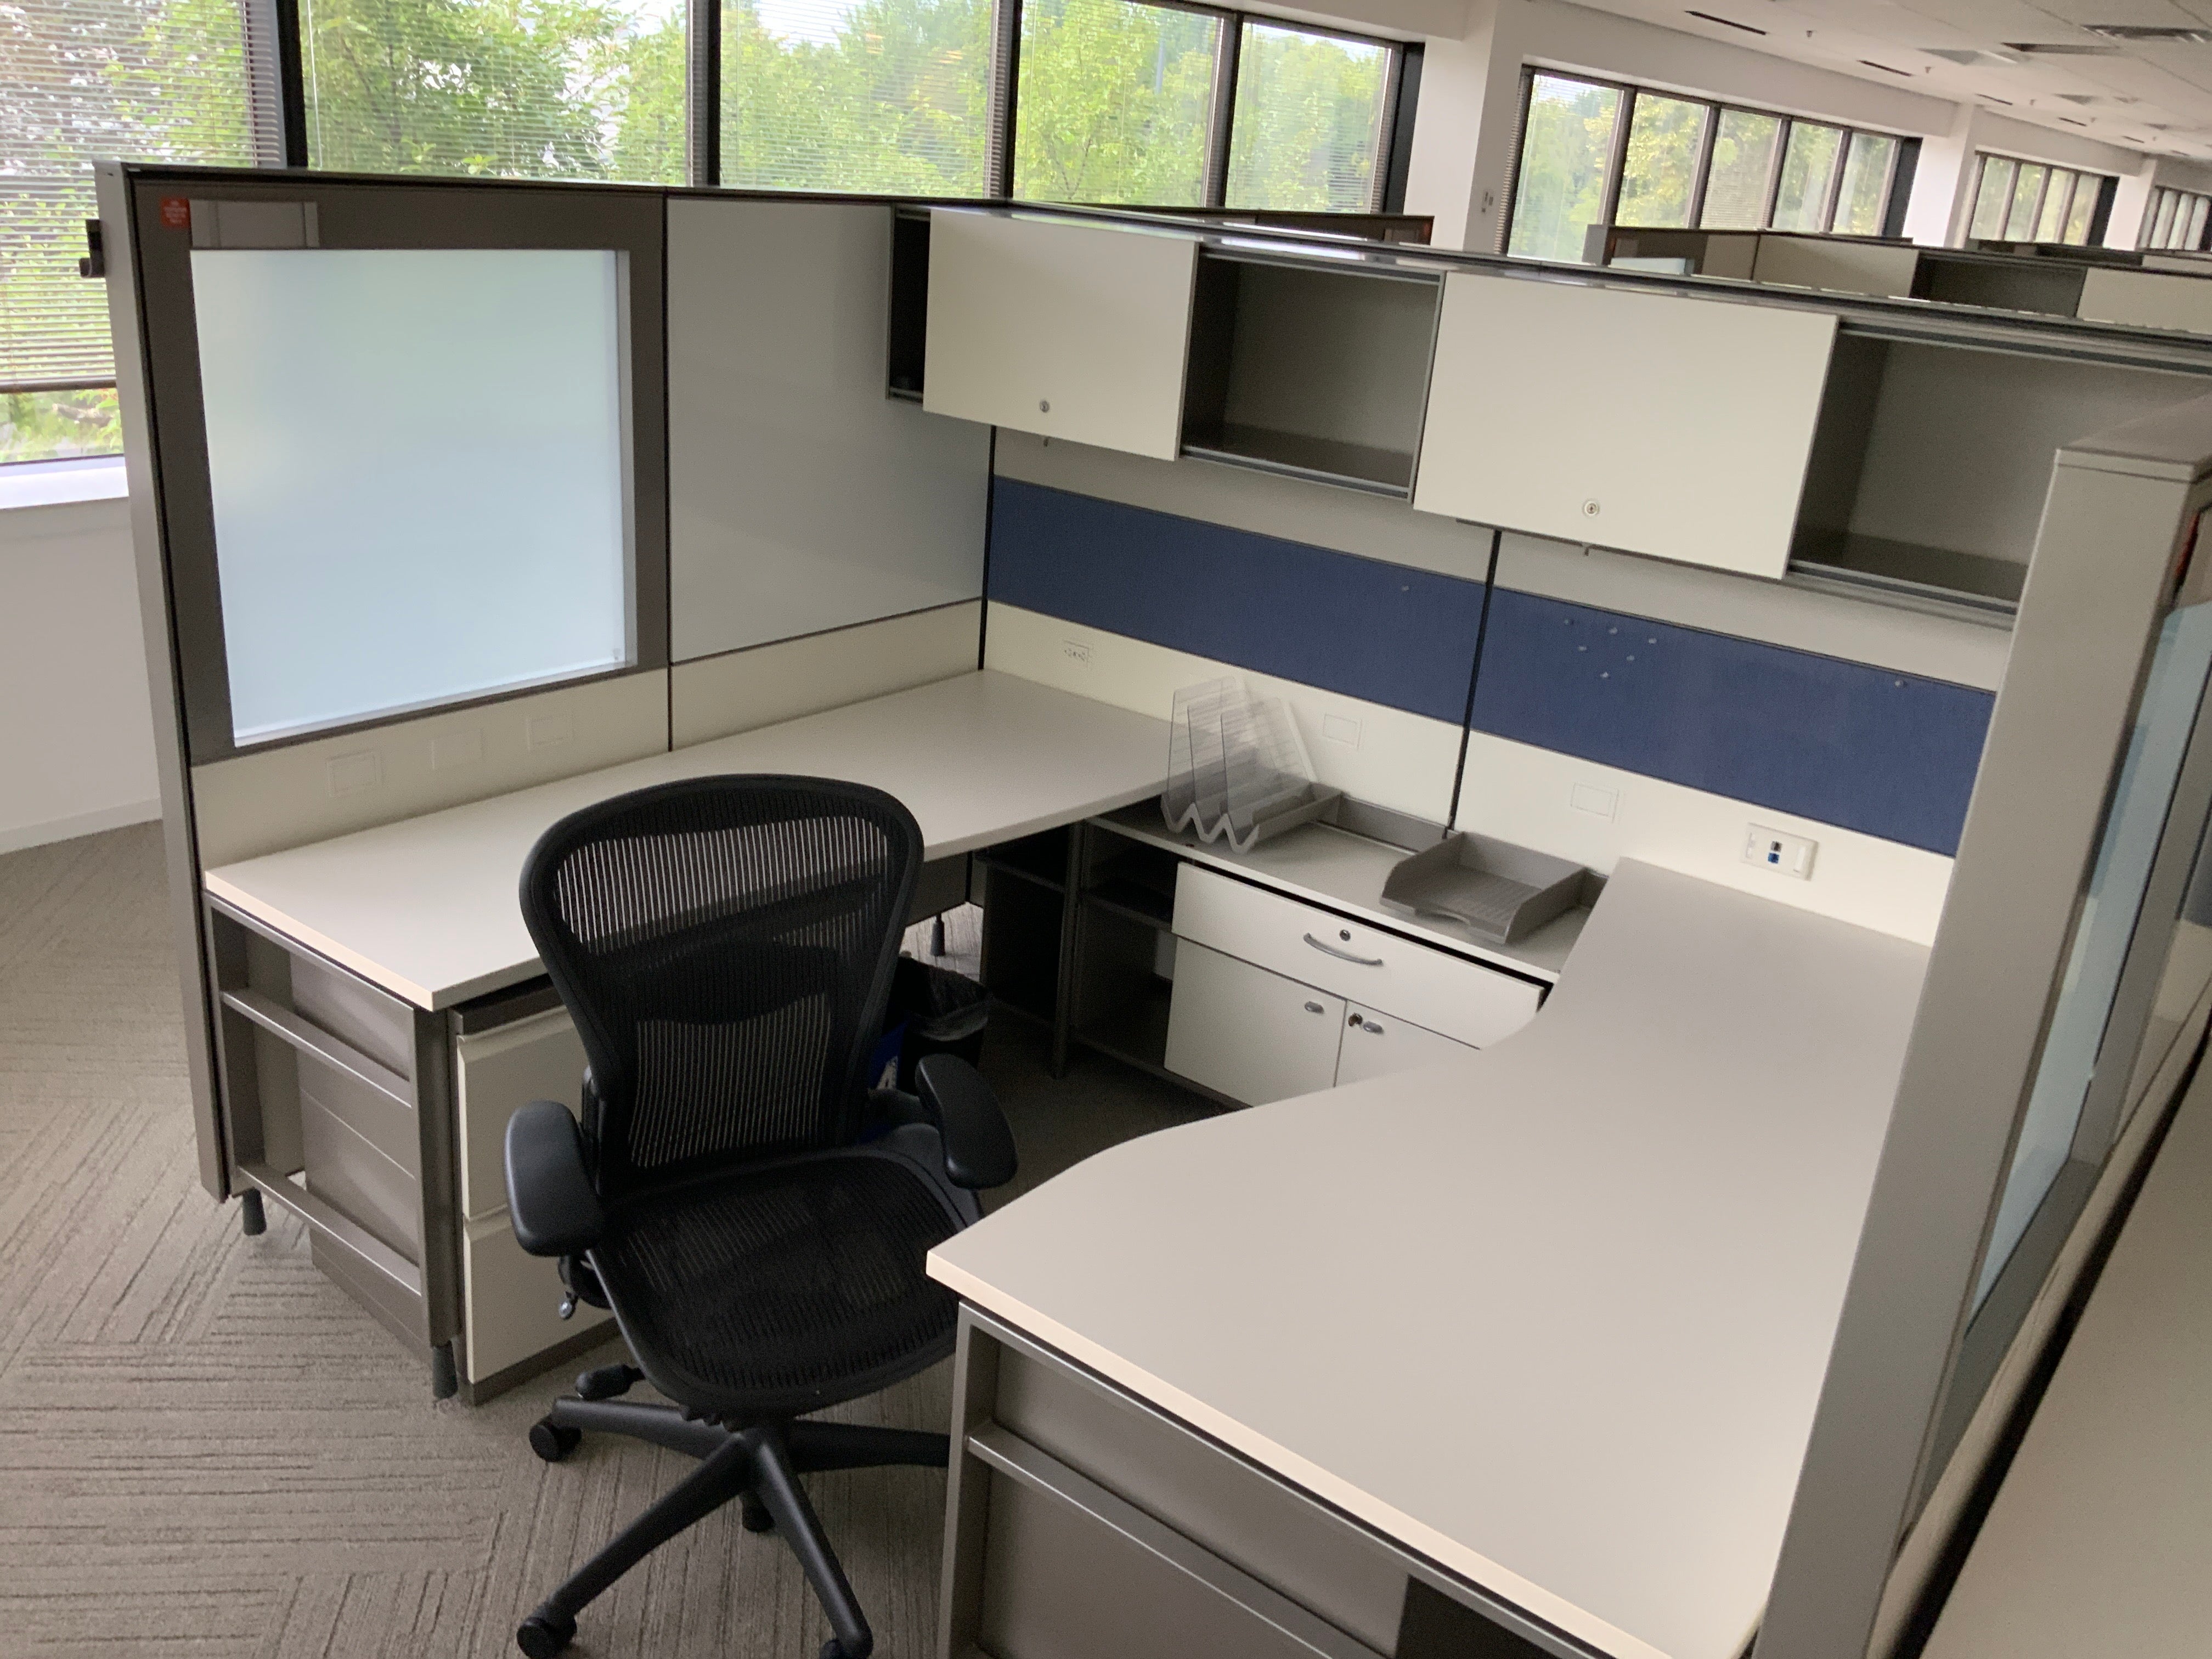 Herman Miller Canvas 6'x8' Workstation - Preowned - FOB Vernon Hills, IL (Min Purchase Qty 12 Stations)